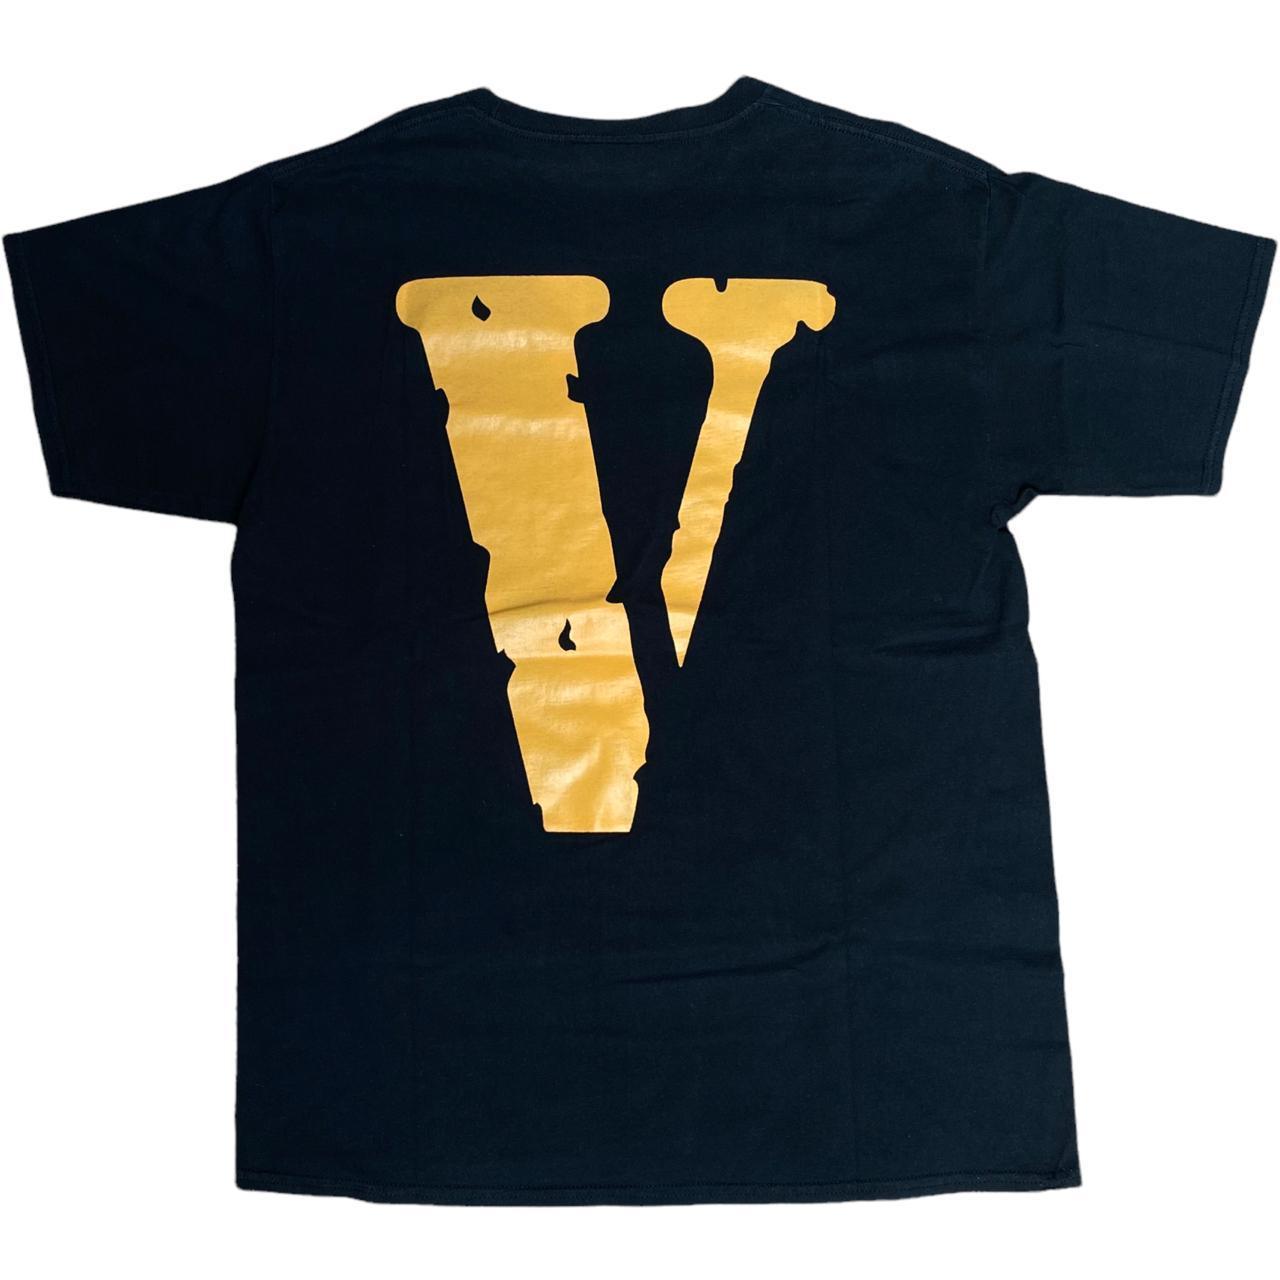 Vlone Front and back Logo Tee Black Orange (M) - Known Source